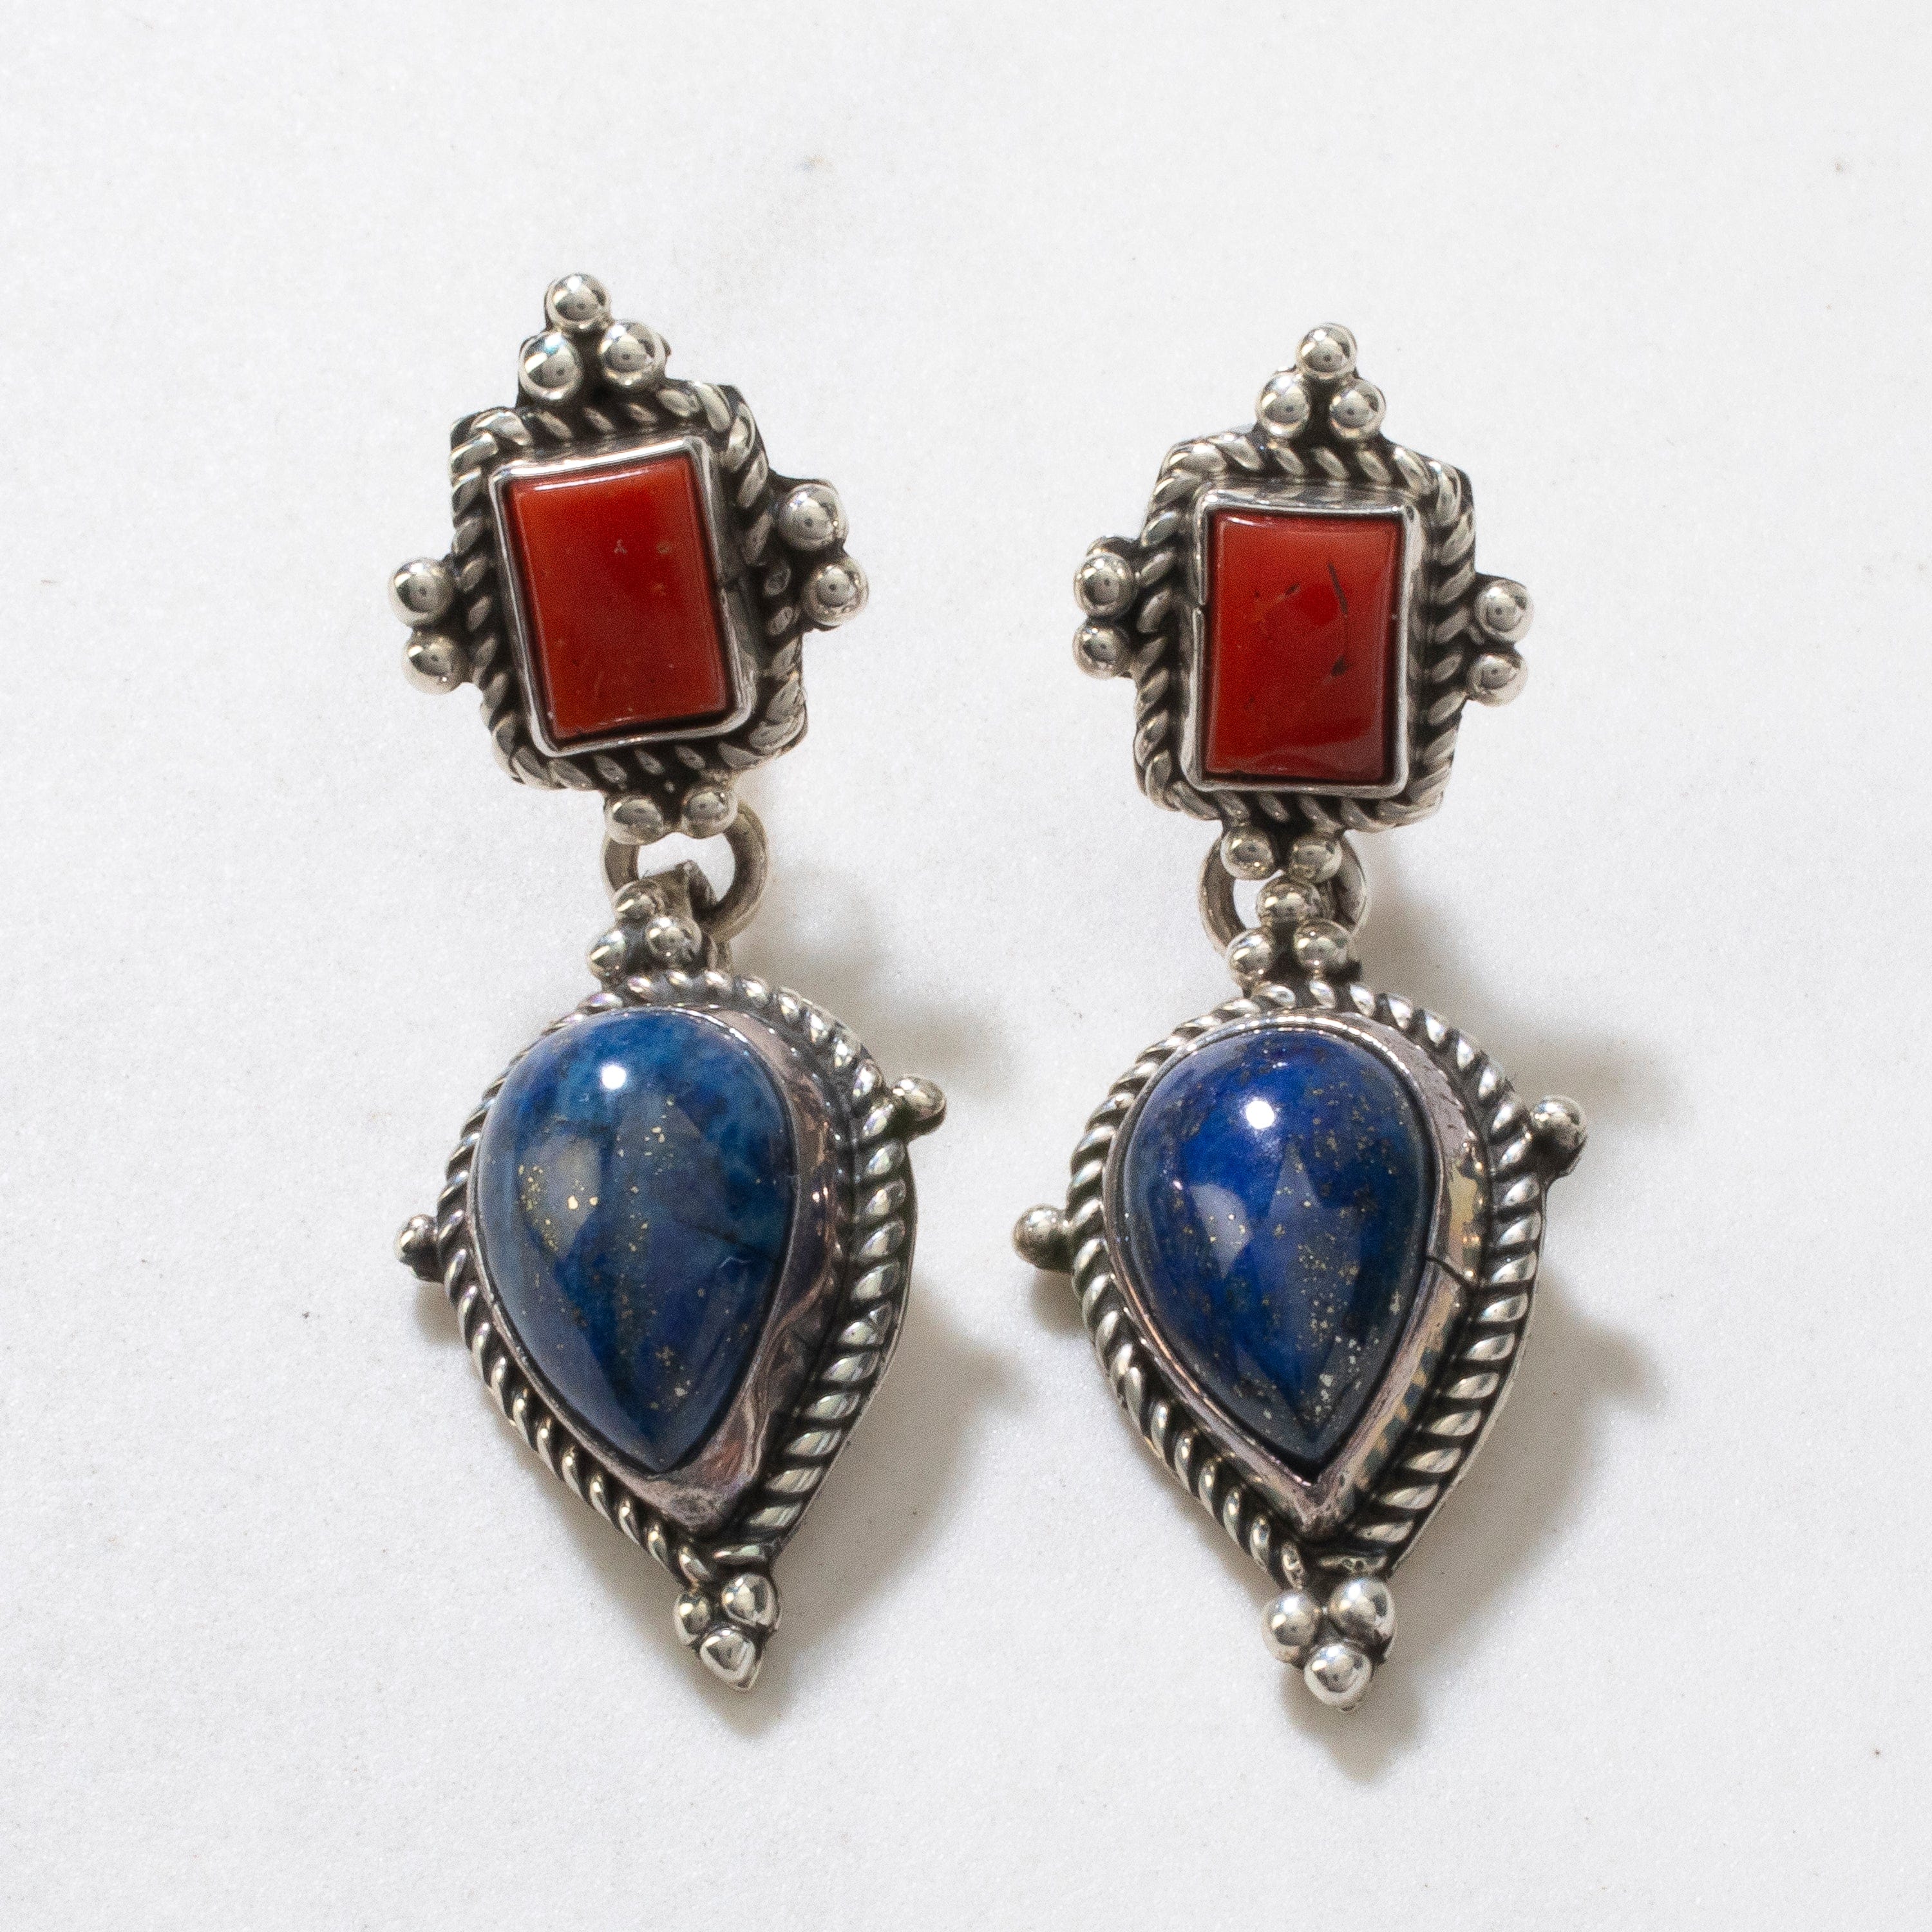 Kalifano Native American Jewelry Lapis & Red Coral Navajo USA Native American Made 925 Sterling Silver Earrings with Stud Backing NAE400.035